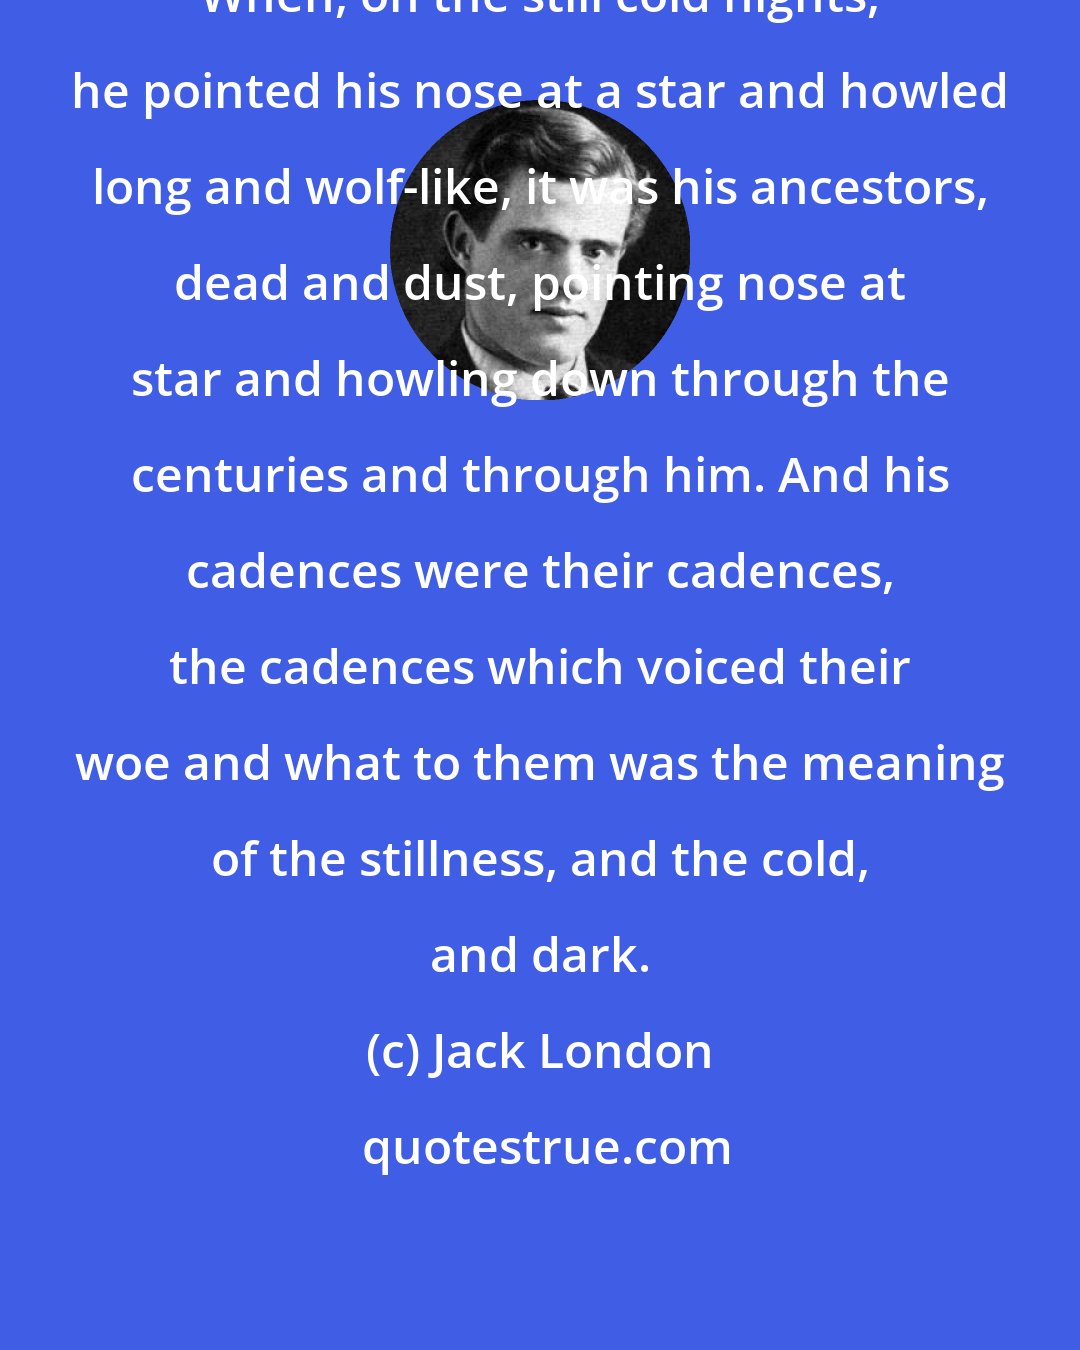 Jack London: When, on the still cold nights, he pointed his nose at a star and howled long and wolf-like, it was his ancestors, dead and dust, pointing nose at star and howling down through the centuries and through him. And his cadences were their cadences, the cadences which voiced their woe and what to them was the meaning of the stillness, and the cold, and dark.